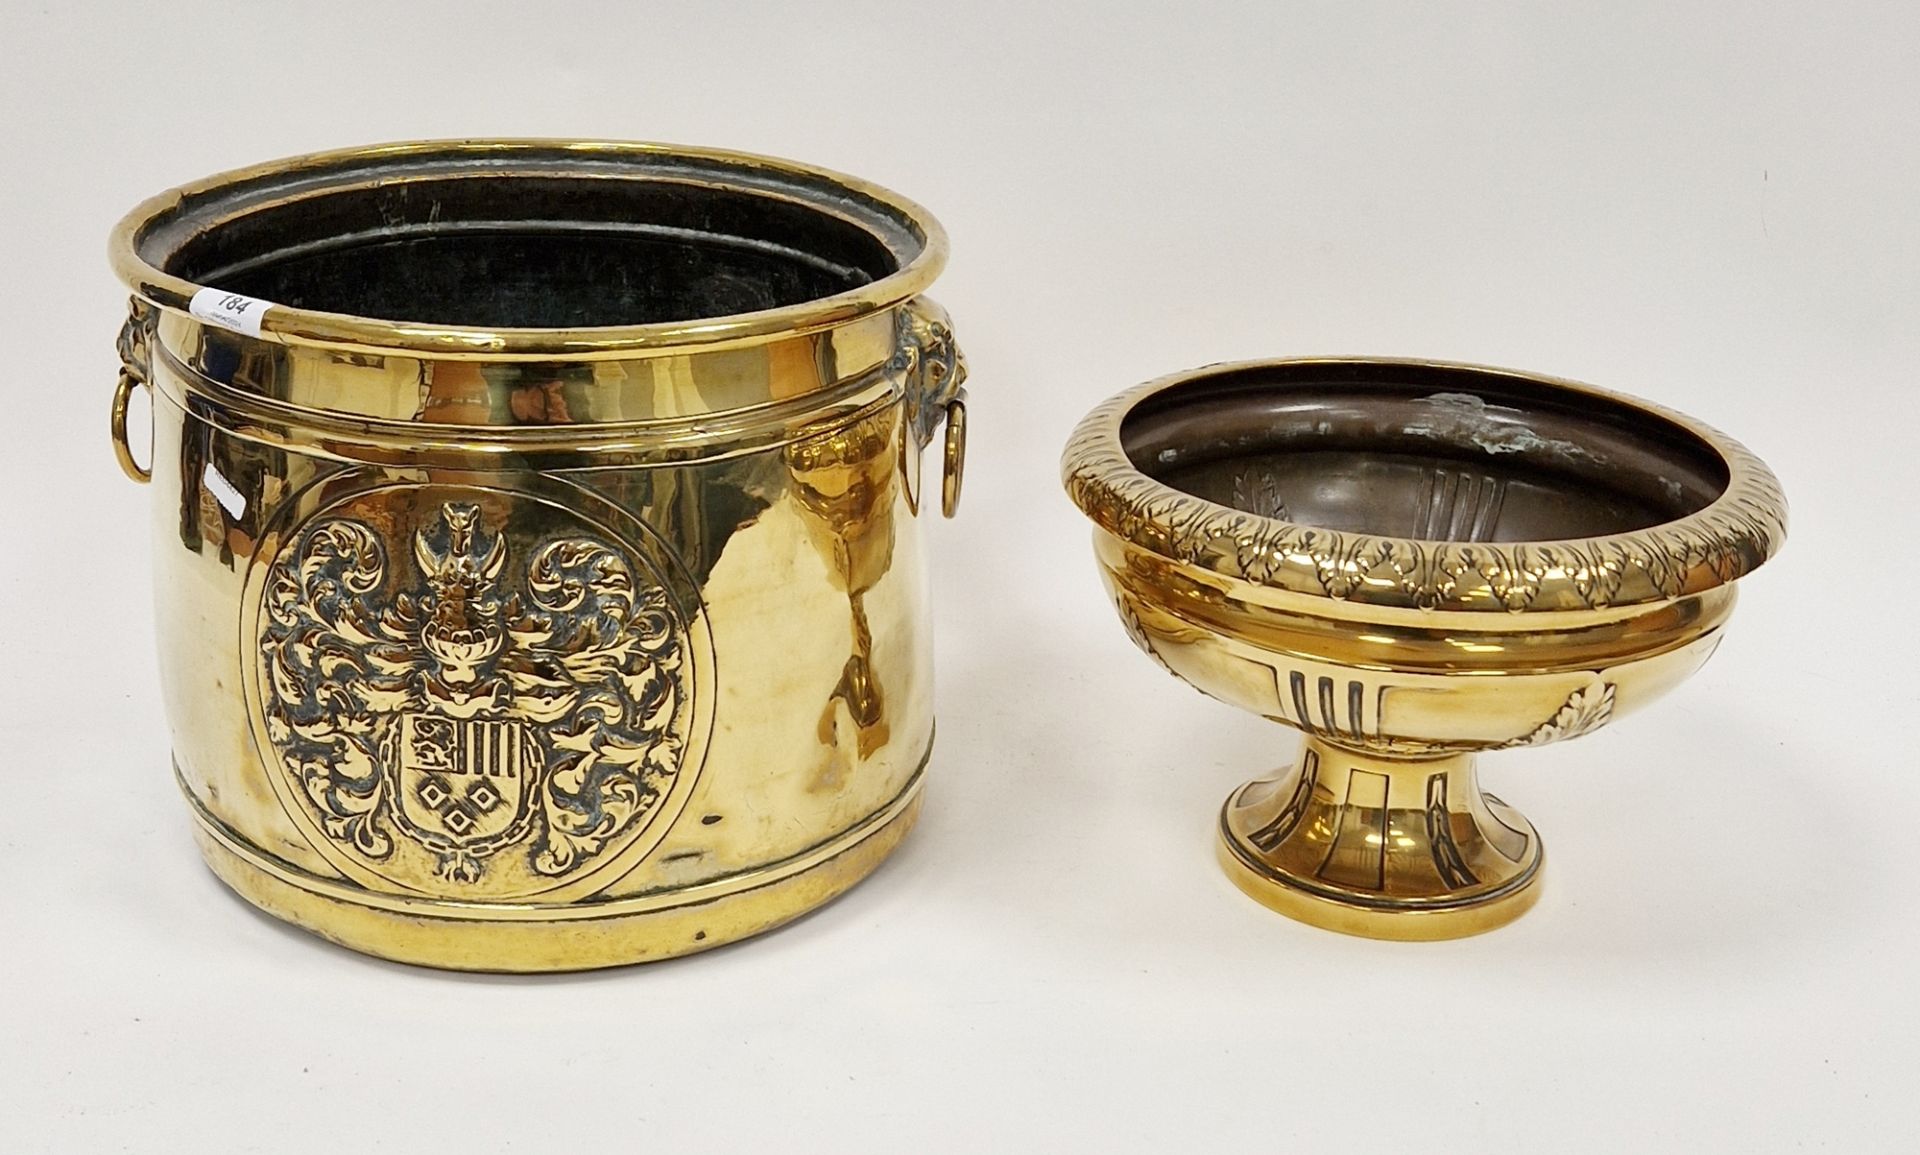 Edwardian embossed brass coal scuttle of cylindrical form, decorated with a mantled armorial, with - Image 5 of 6